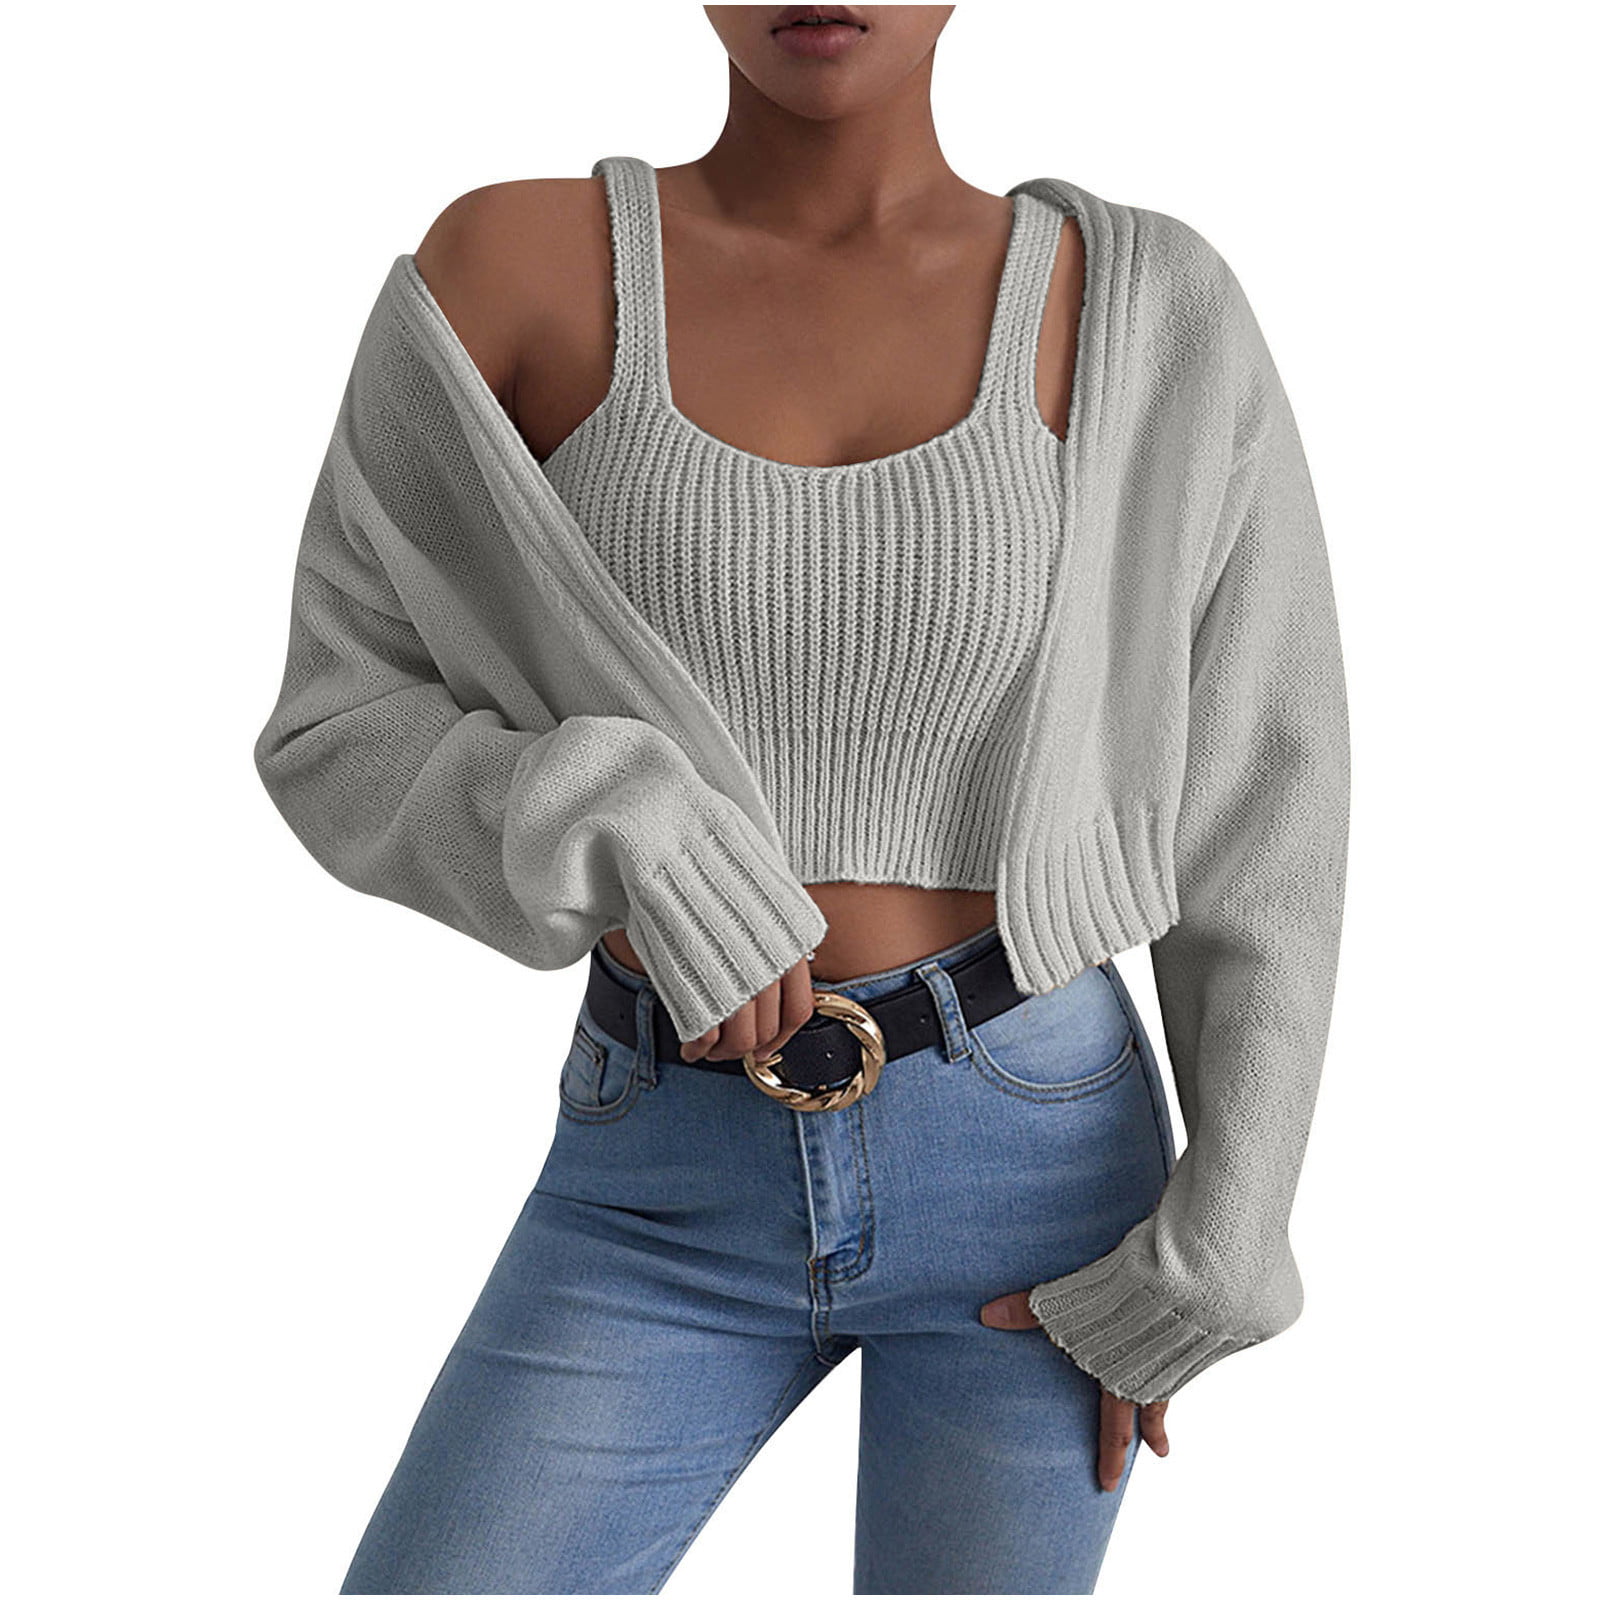 YWDJ Two Piece Outfits for Women Going out Plus Size Casual Knit